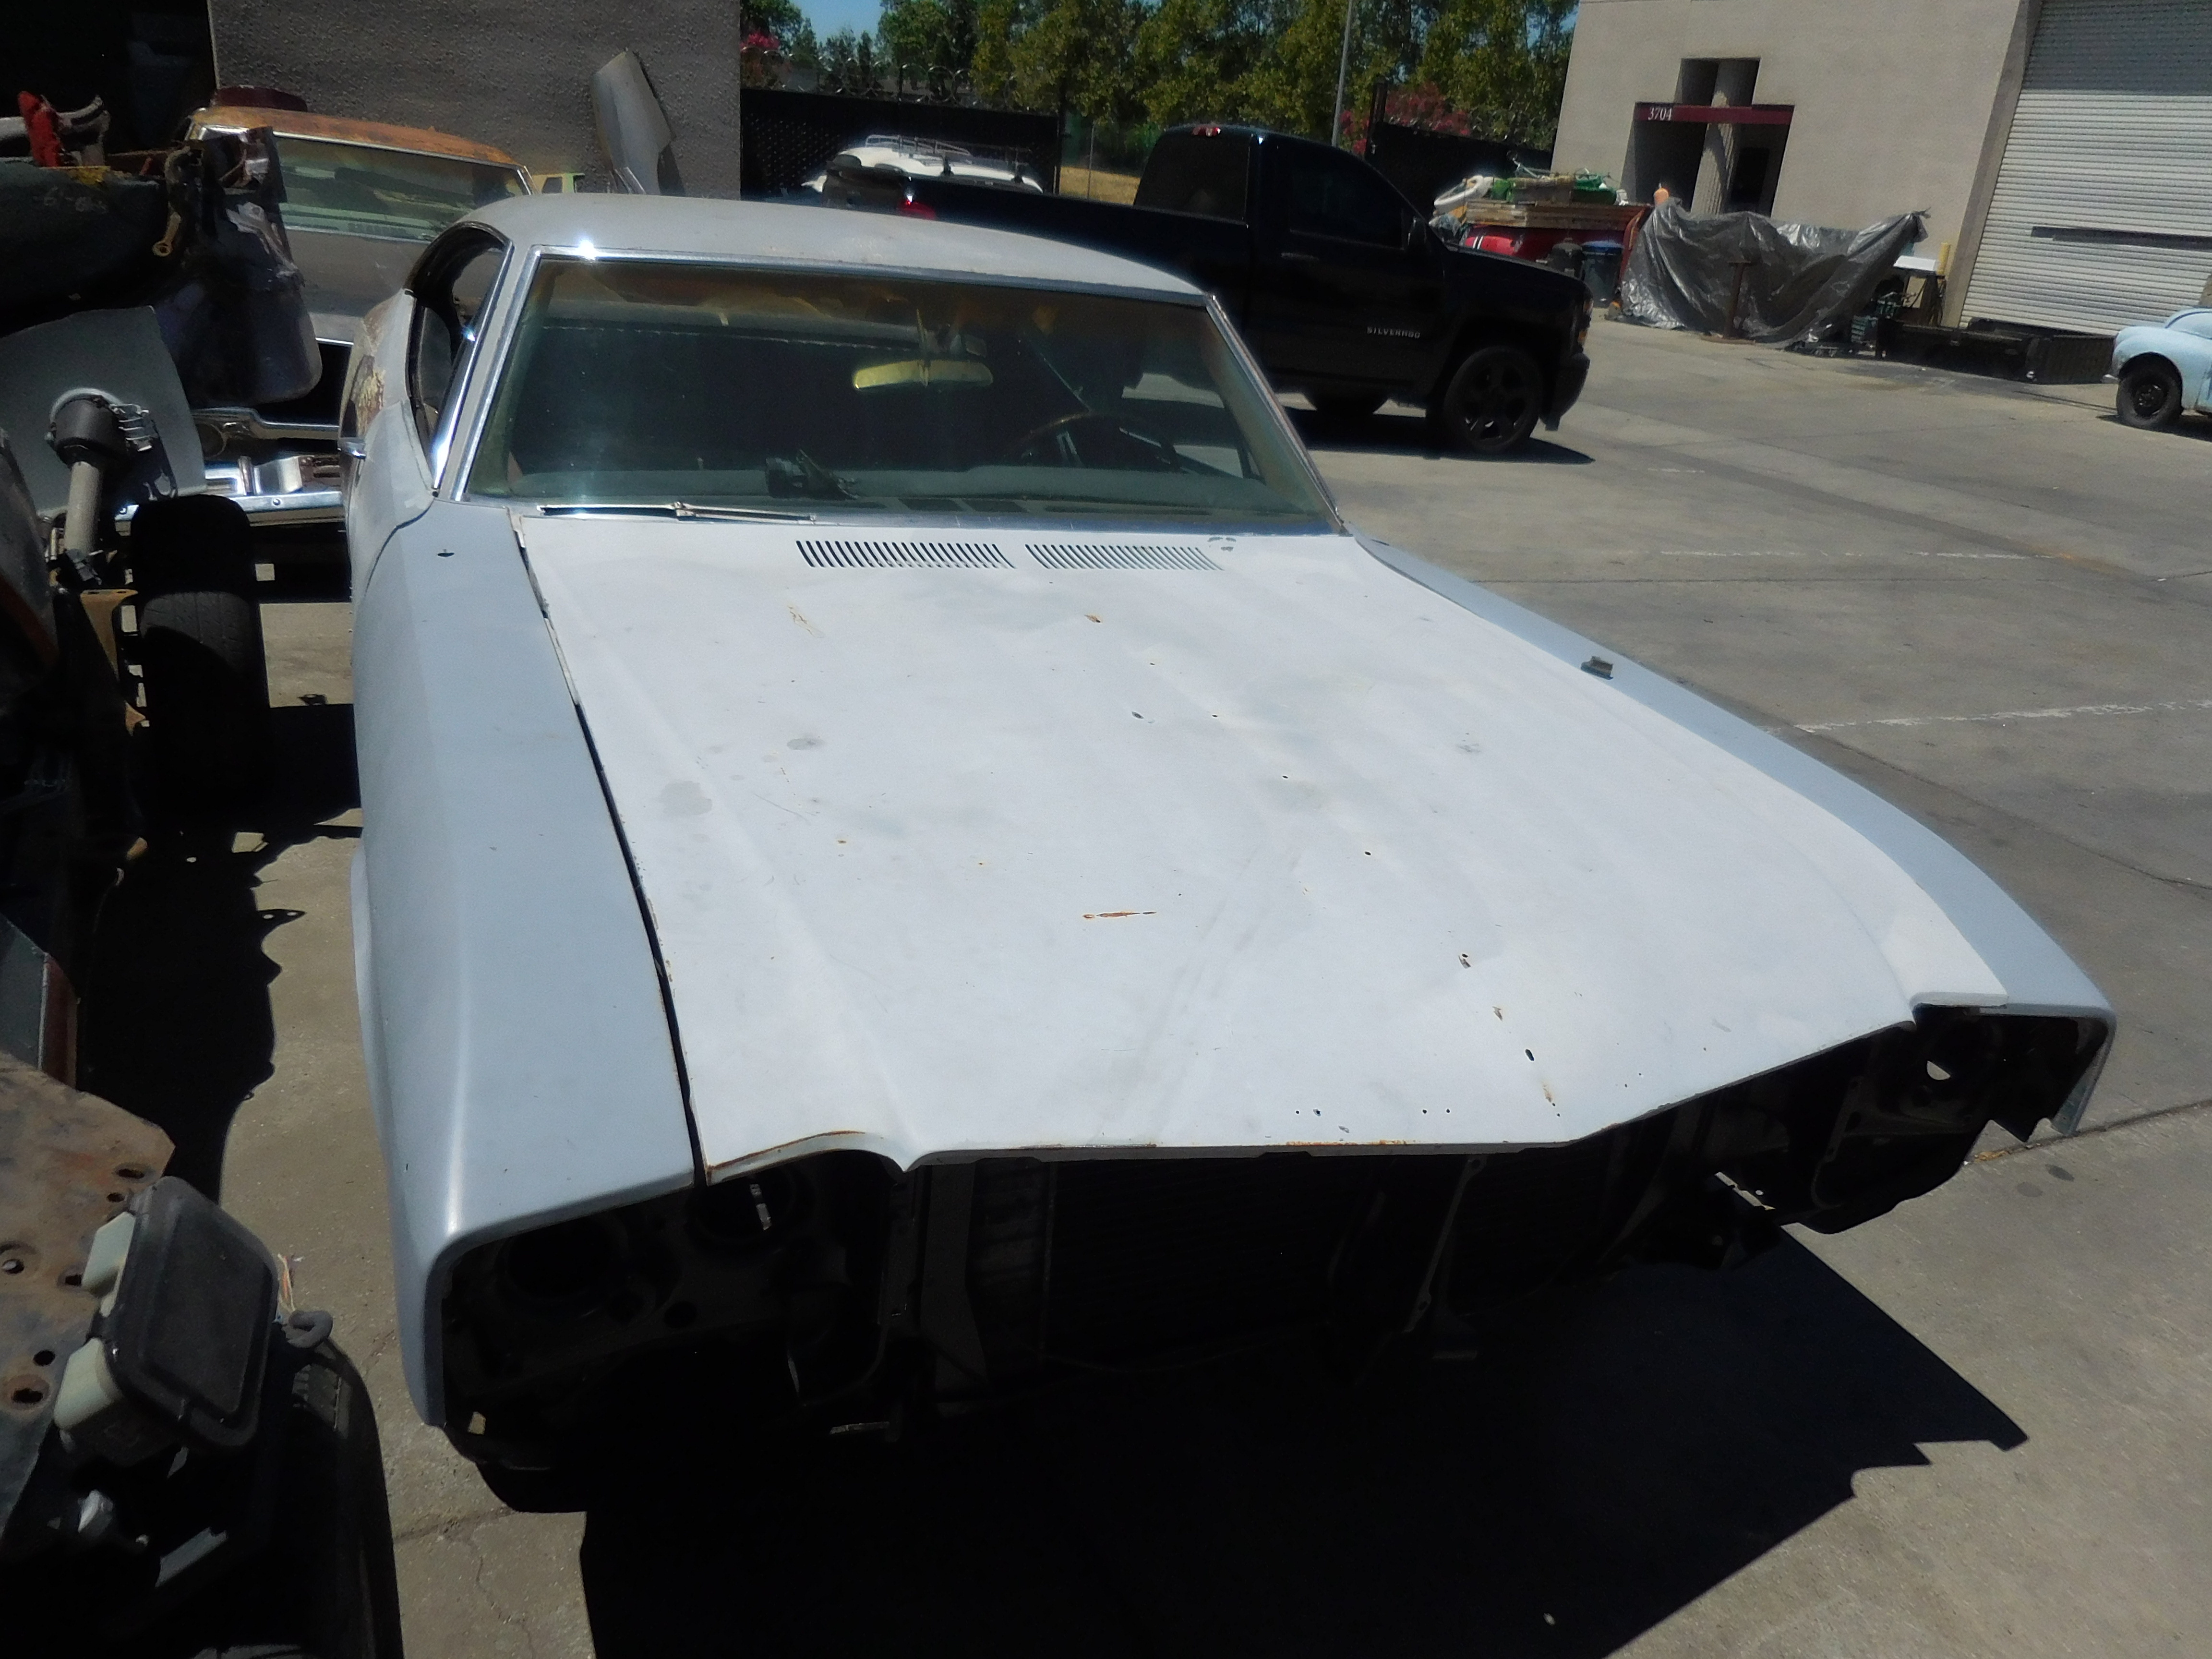 Future, Project, 1968, Buick, Skylark, 350, AT, cars for sale,cars,for,sale